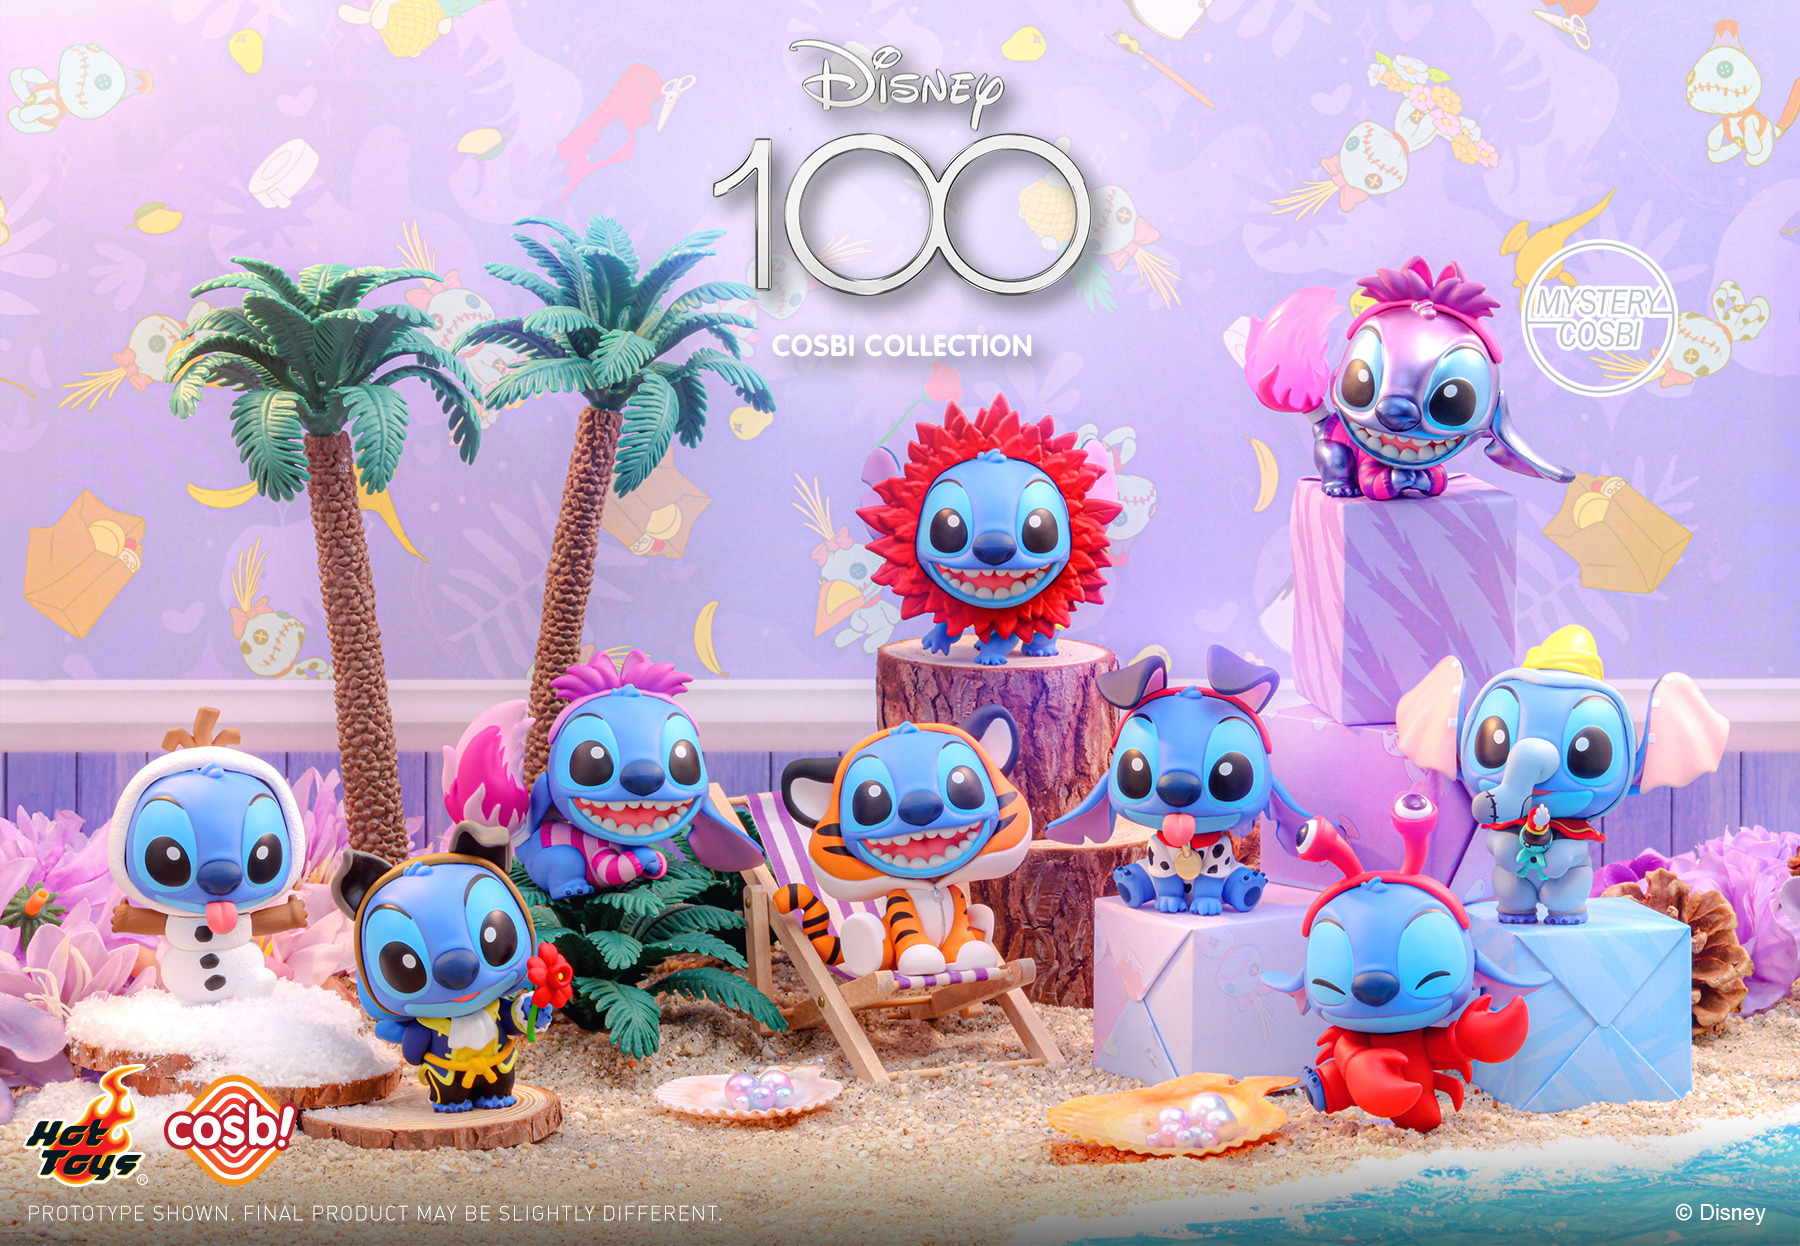 Hot Toys - Stitch in Costume Cosbi Collection_PR1